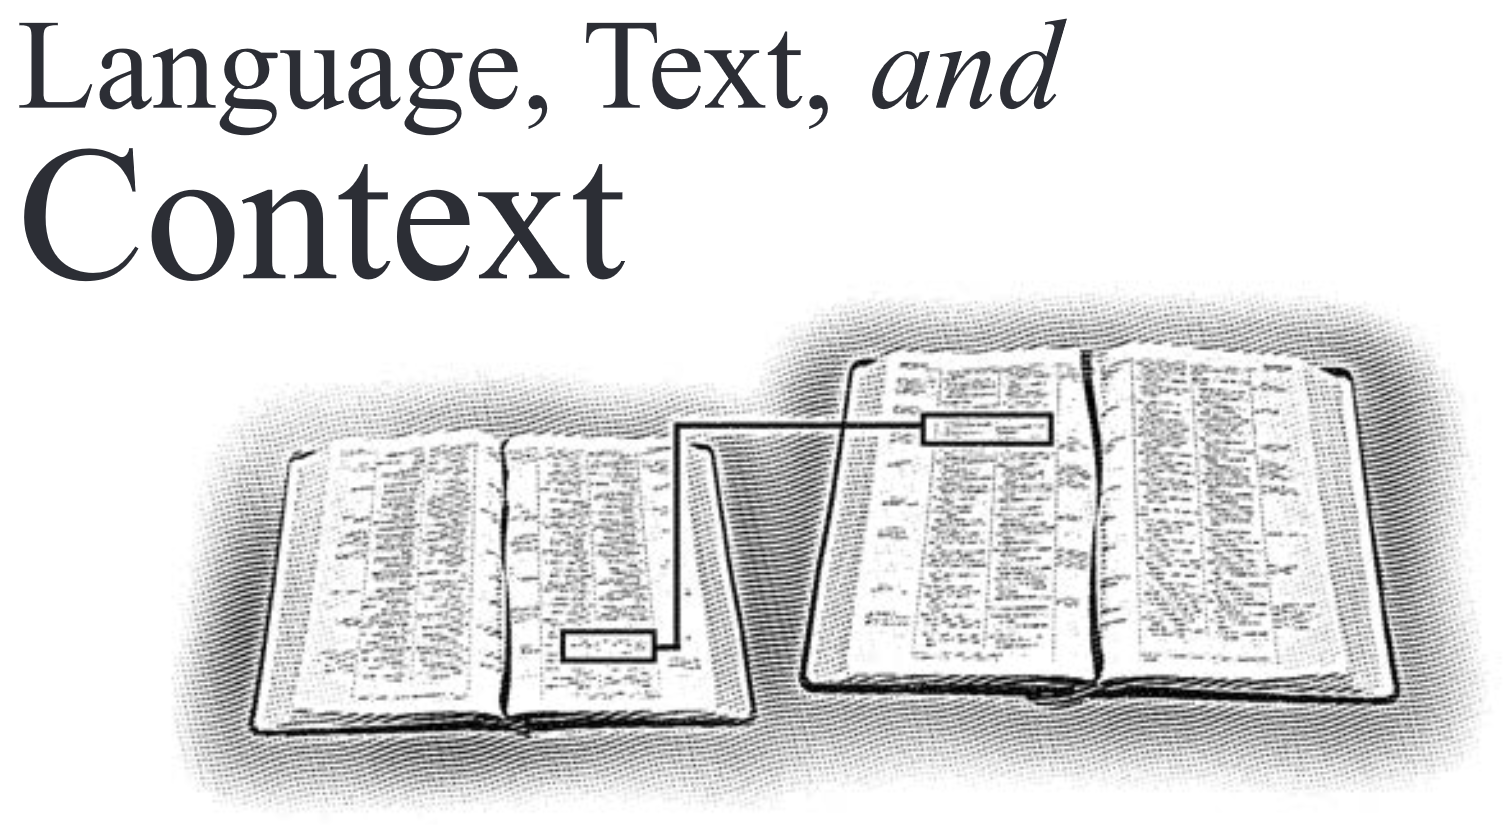 Language, Text, and Context